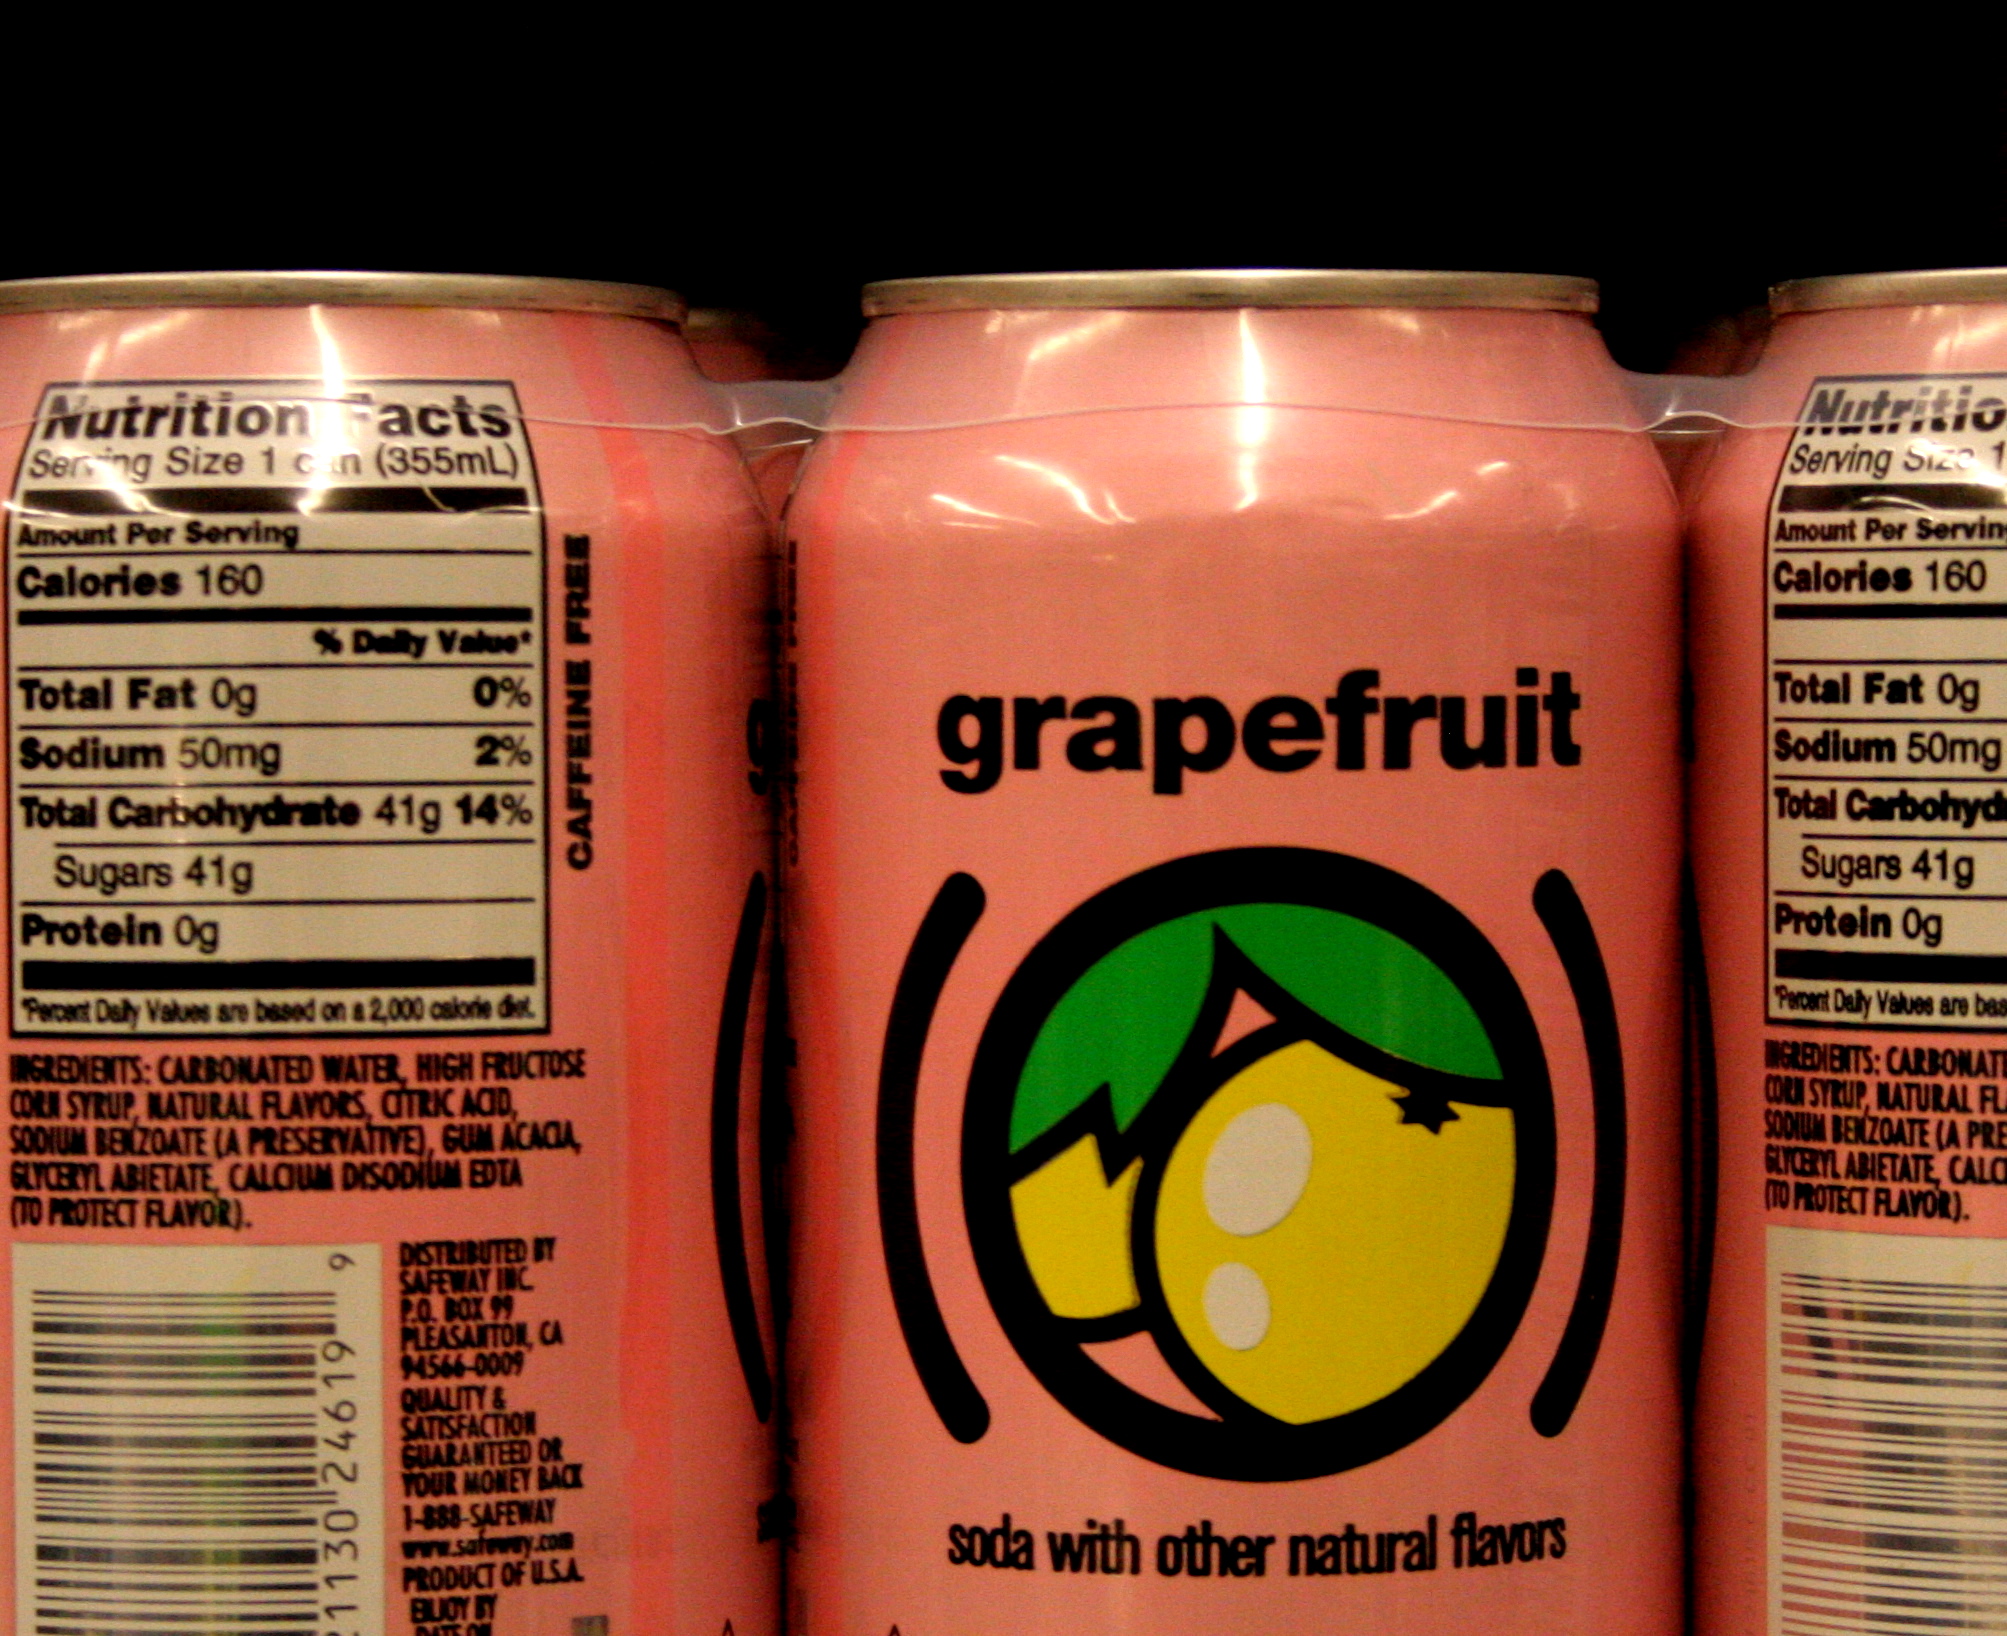 three bottles of gfruit with label on the top